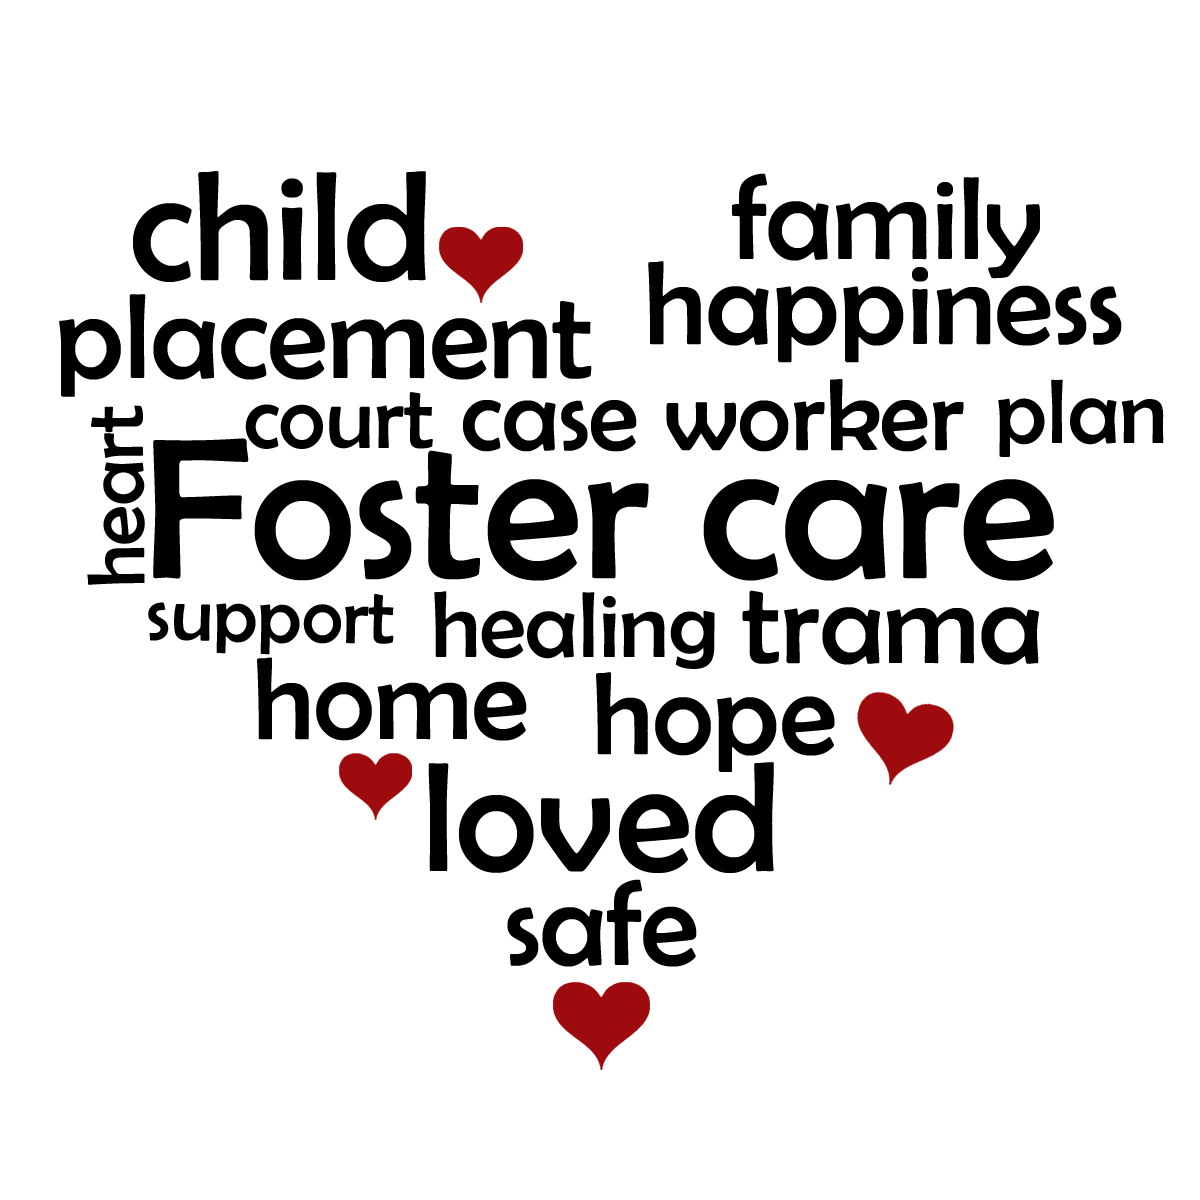 Got questions about foster care and adoptions? We have answers!